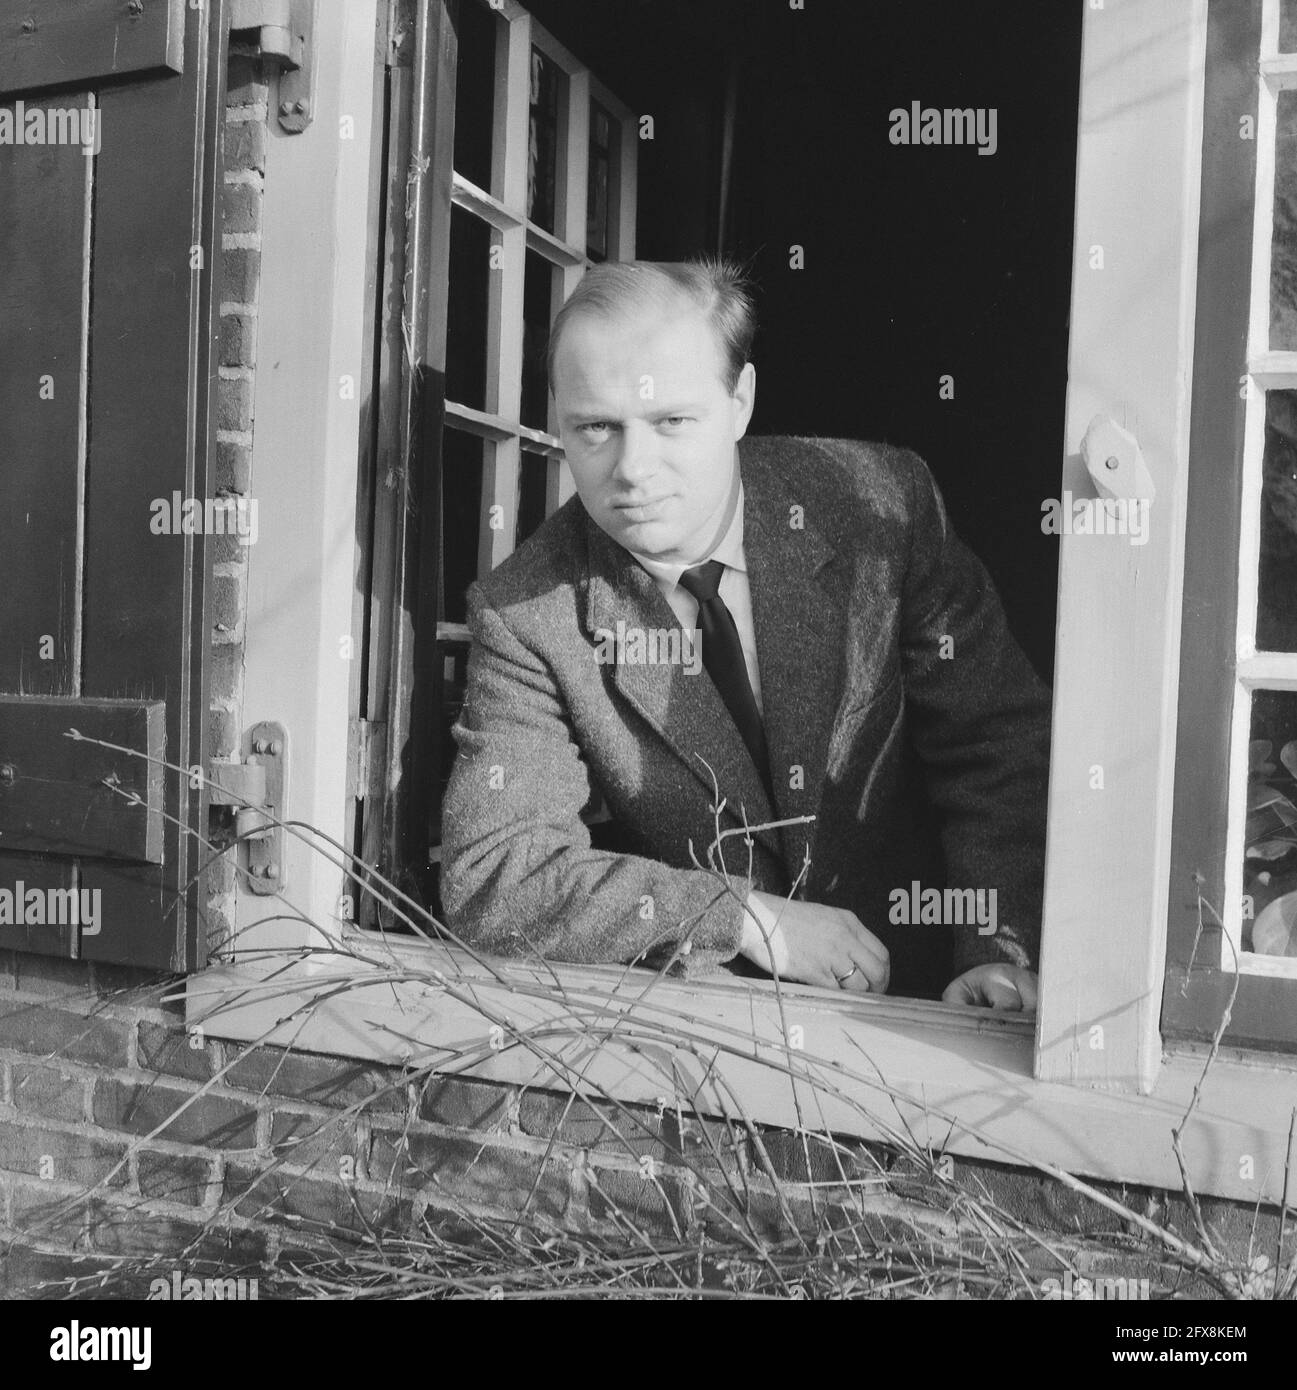 Bernhard Haitink who was offered the position as director of the Minneapolis Symphony Orchestra, December 30, 1959, conductors, music, orchestras, portraits, The Netherlands, 20th century press agency photo, news to remember, documentary, historic photography 1945-1990, visual stories, human history of the Twentieth Century, capturing moments in time Stock Photo